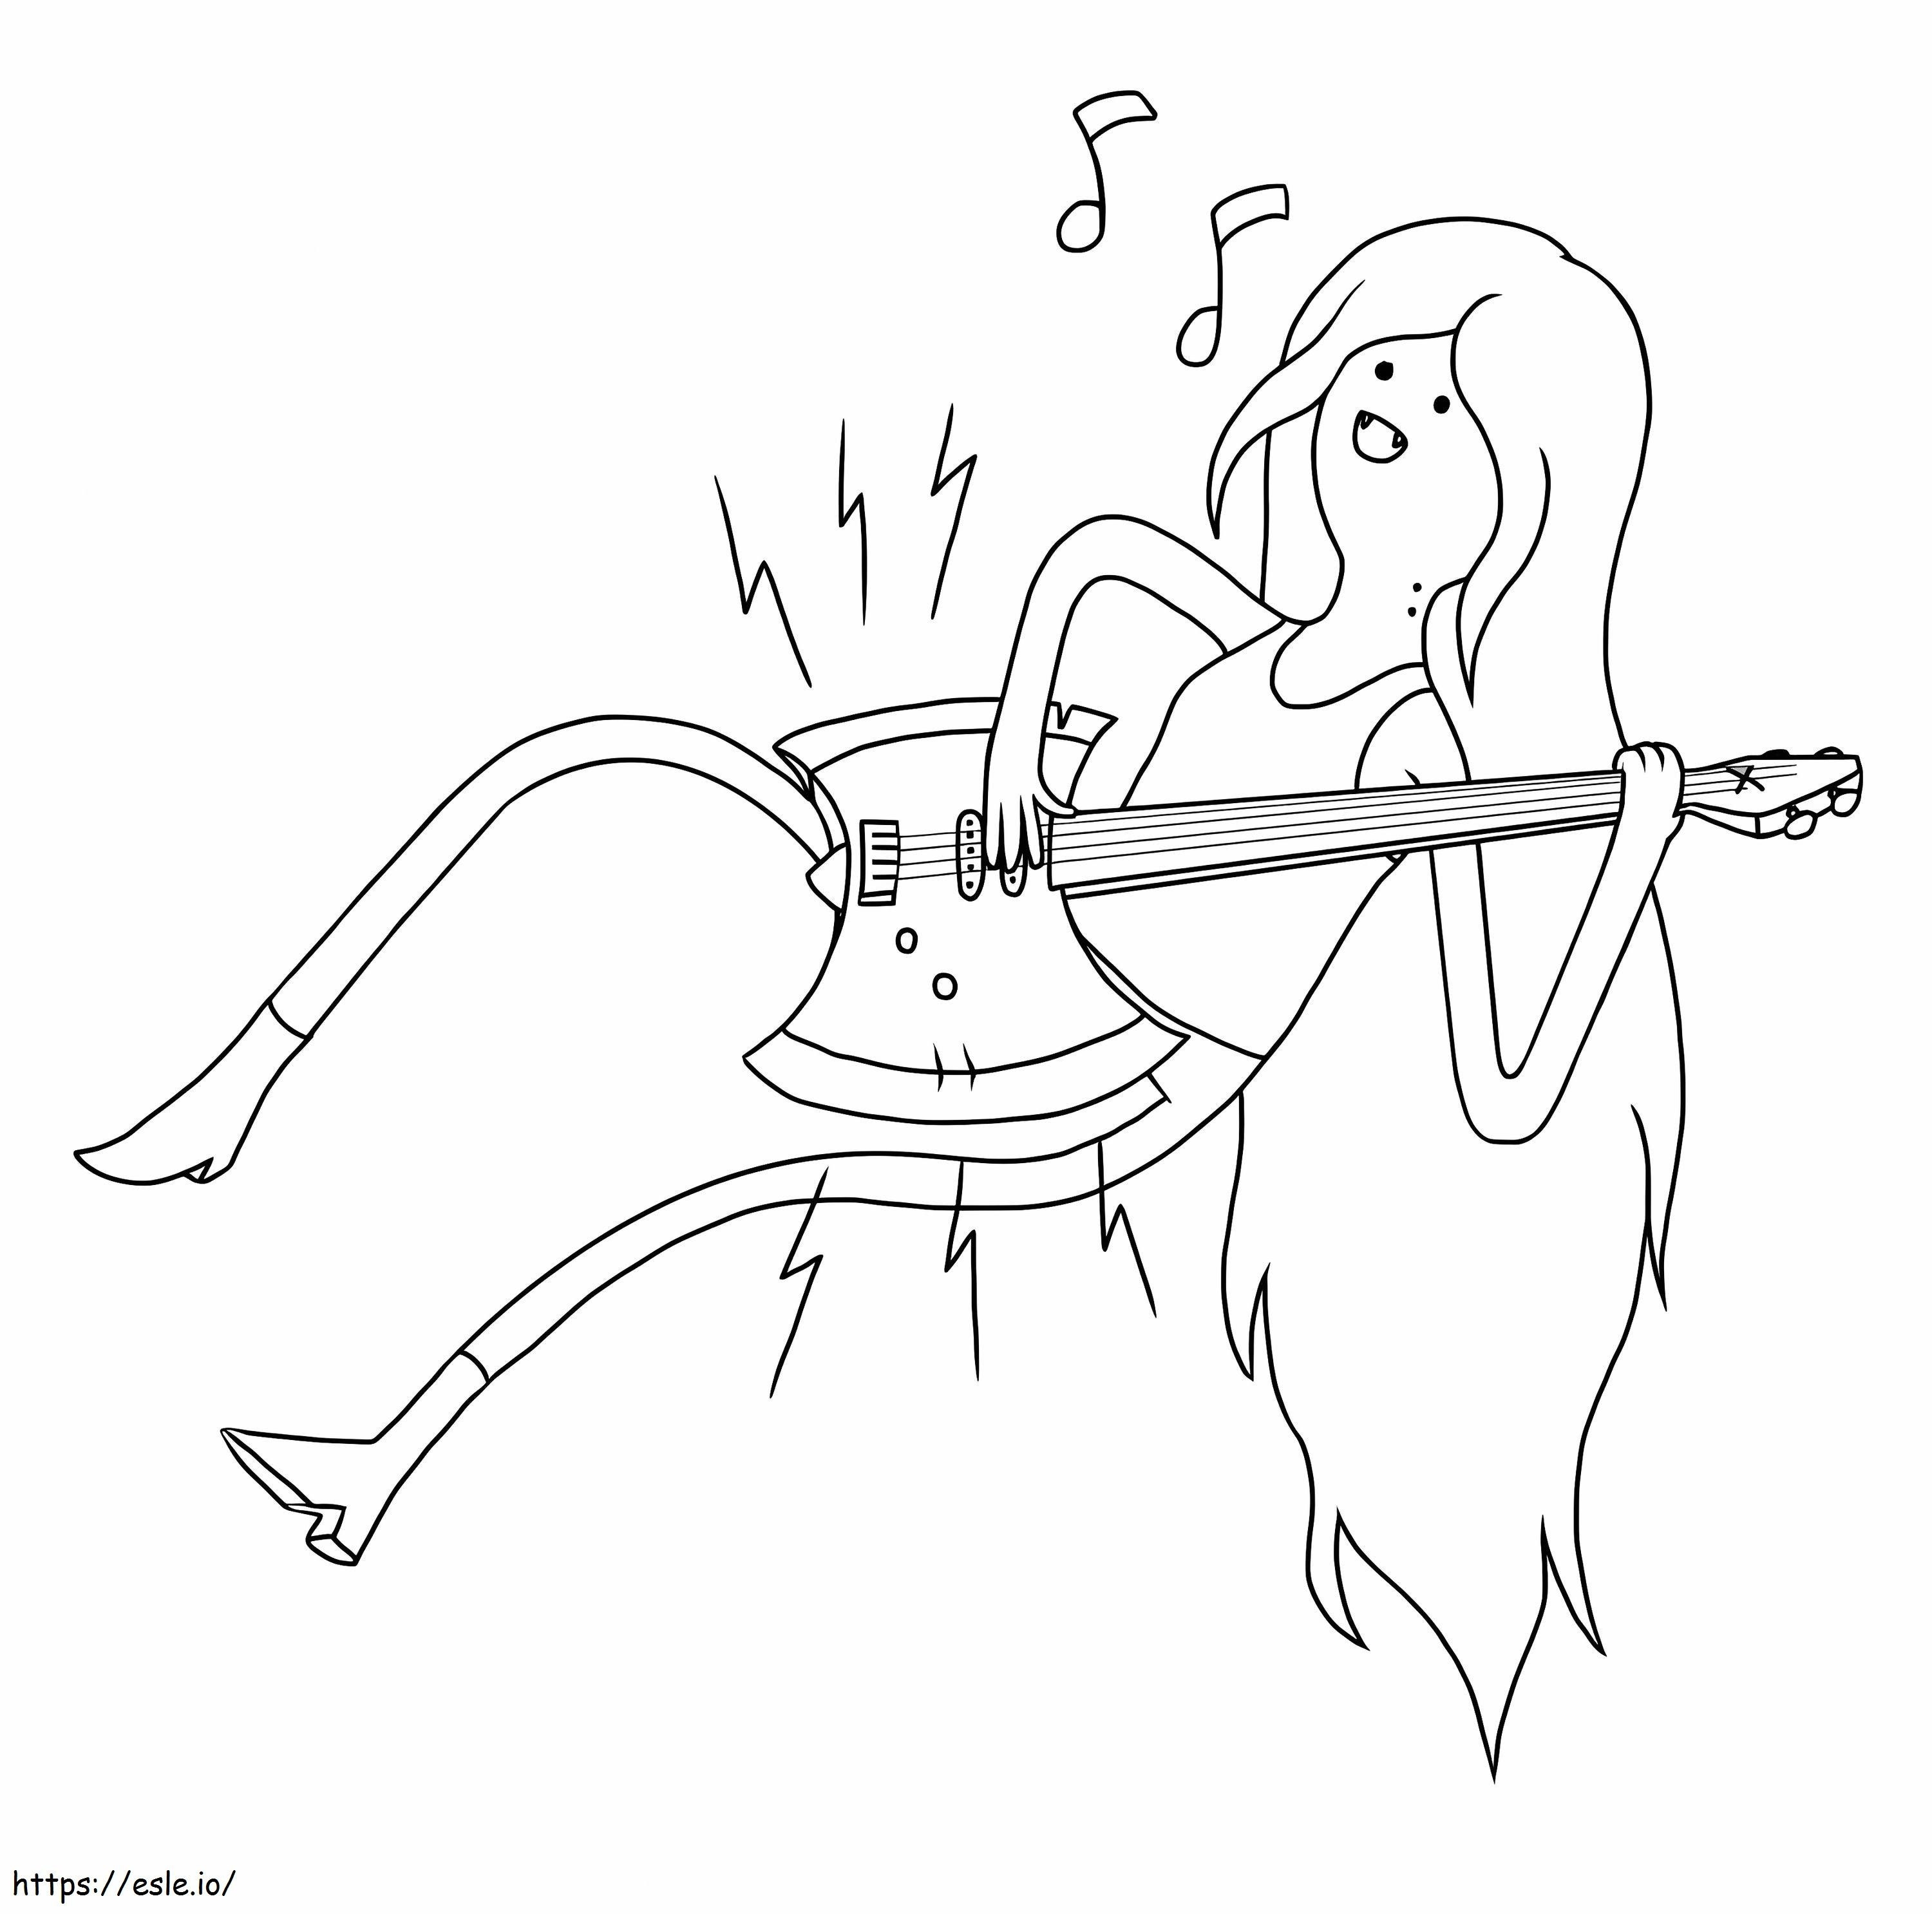 Marceline Playing The Guitar coloring page